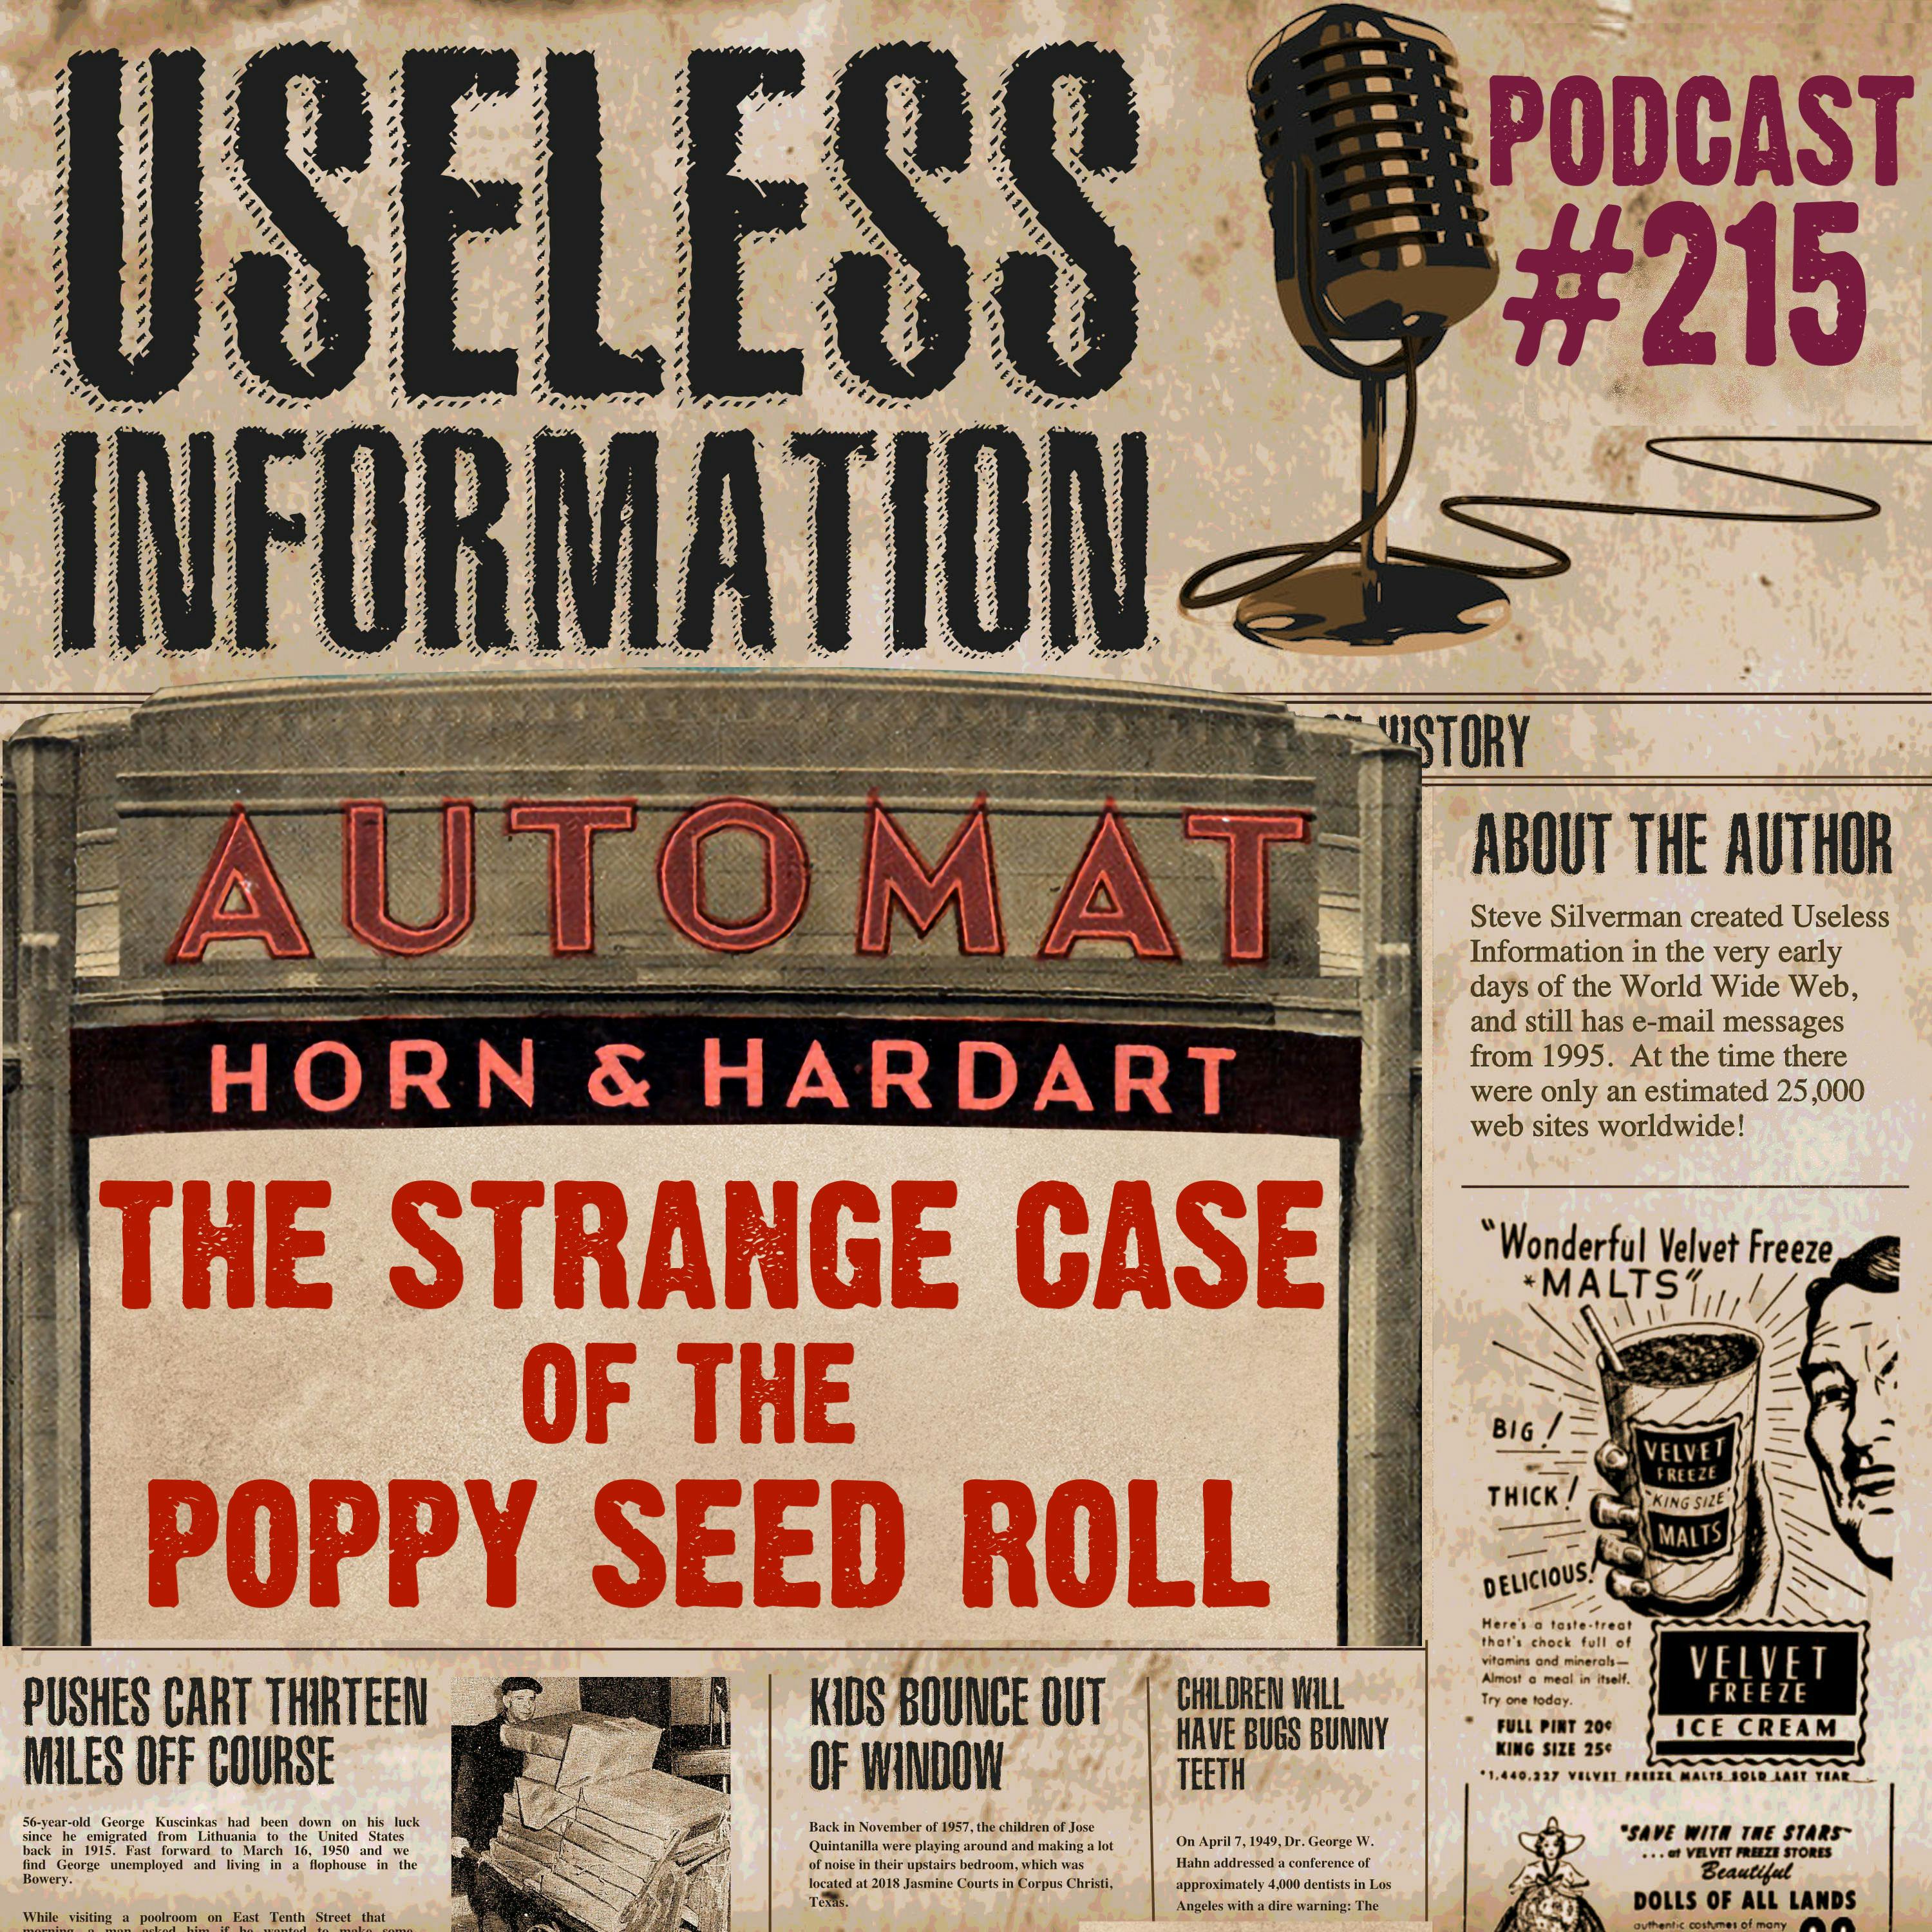 The Strange Case of the Poppy Seed Roll - UI #215